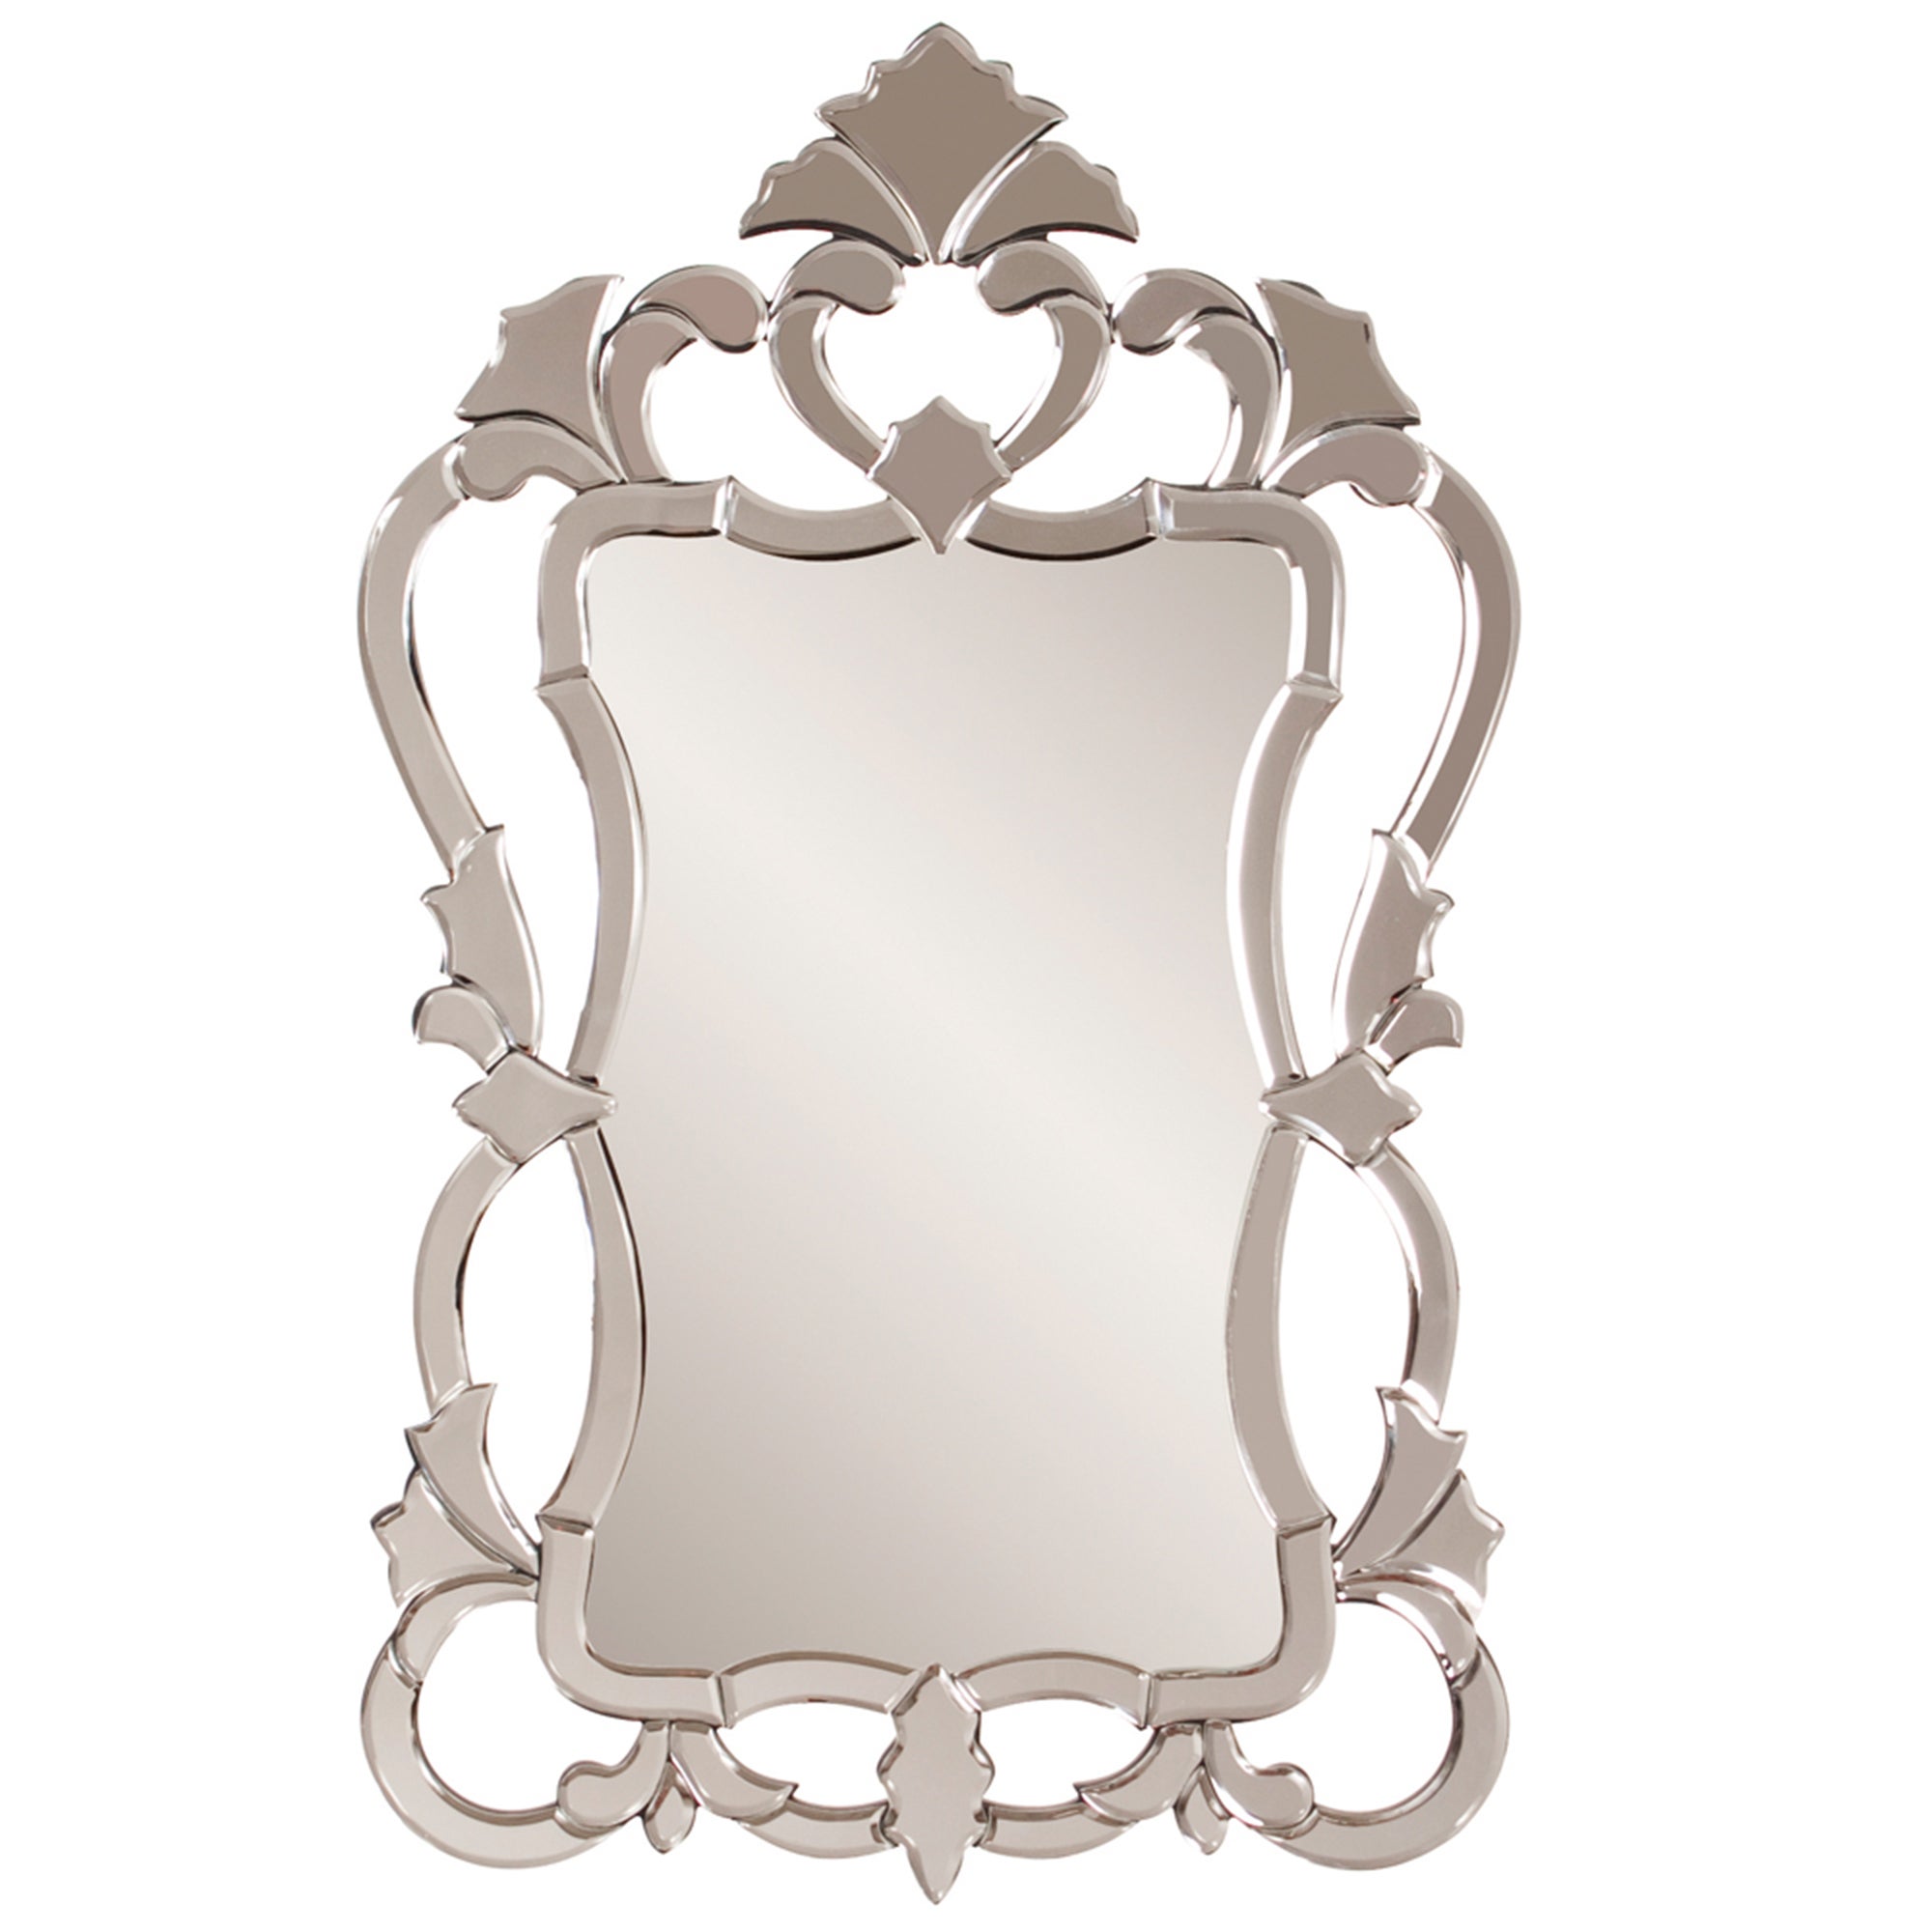 Mirrors - Traditional | The Howard Elliott Collection